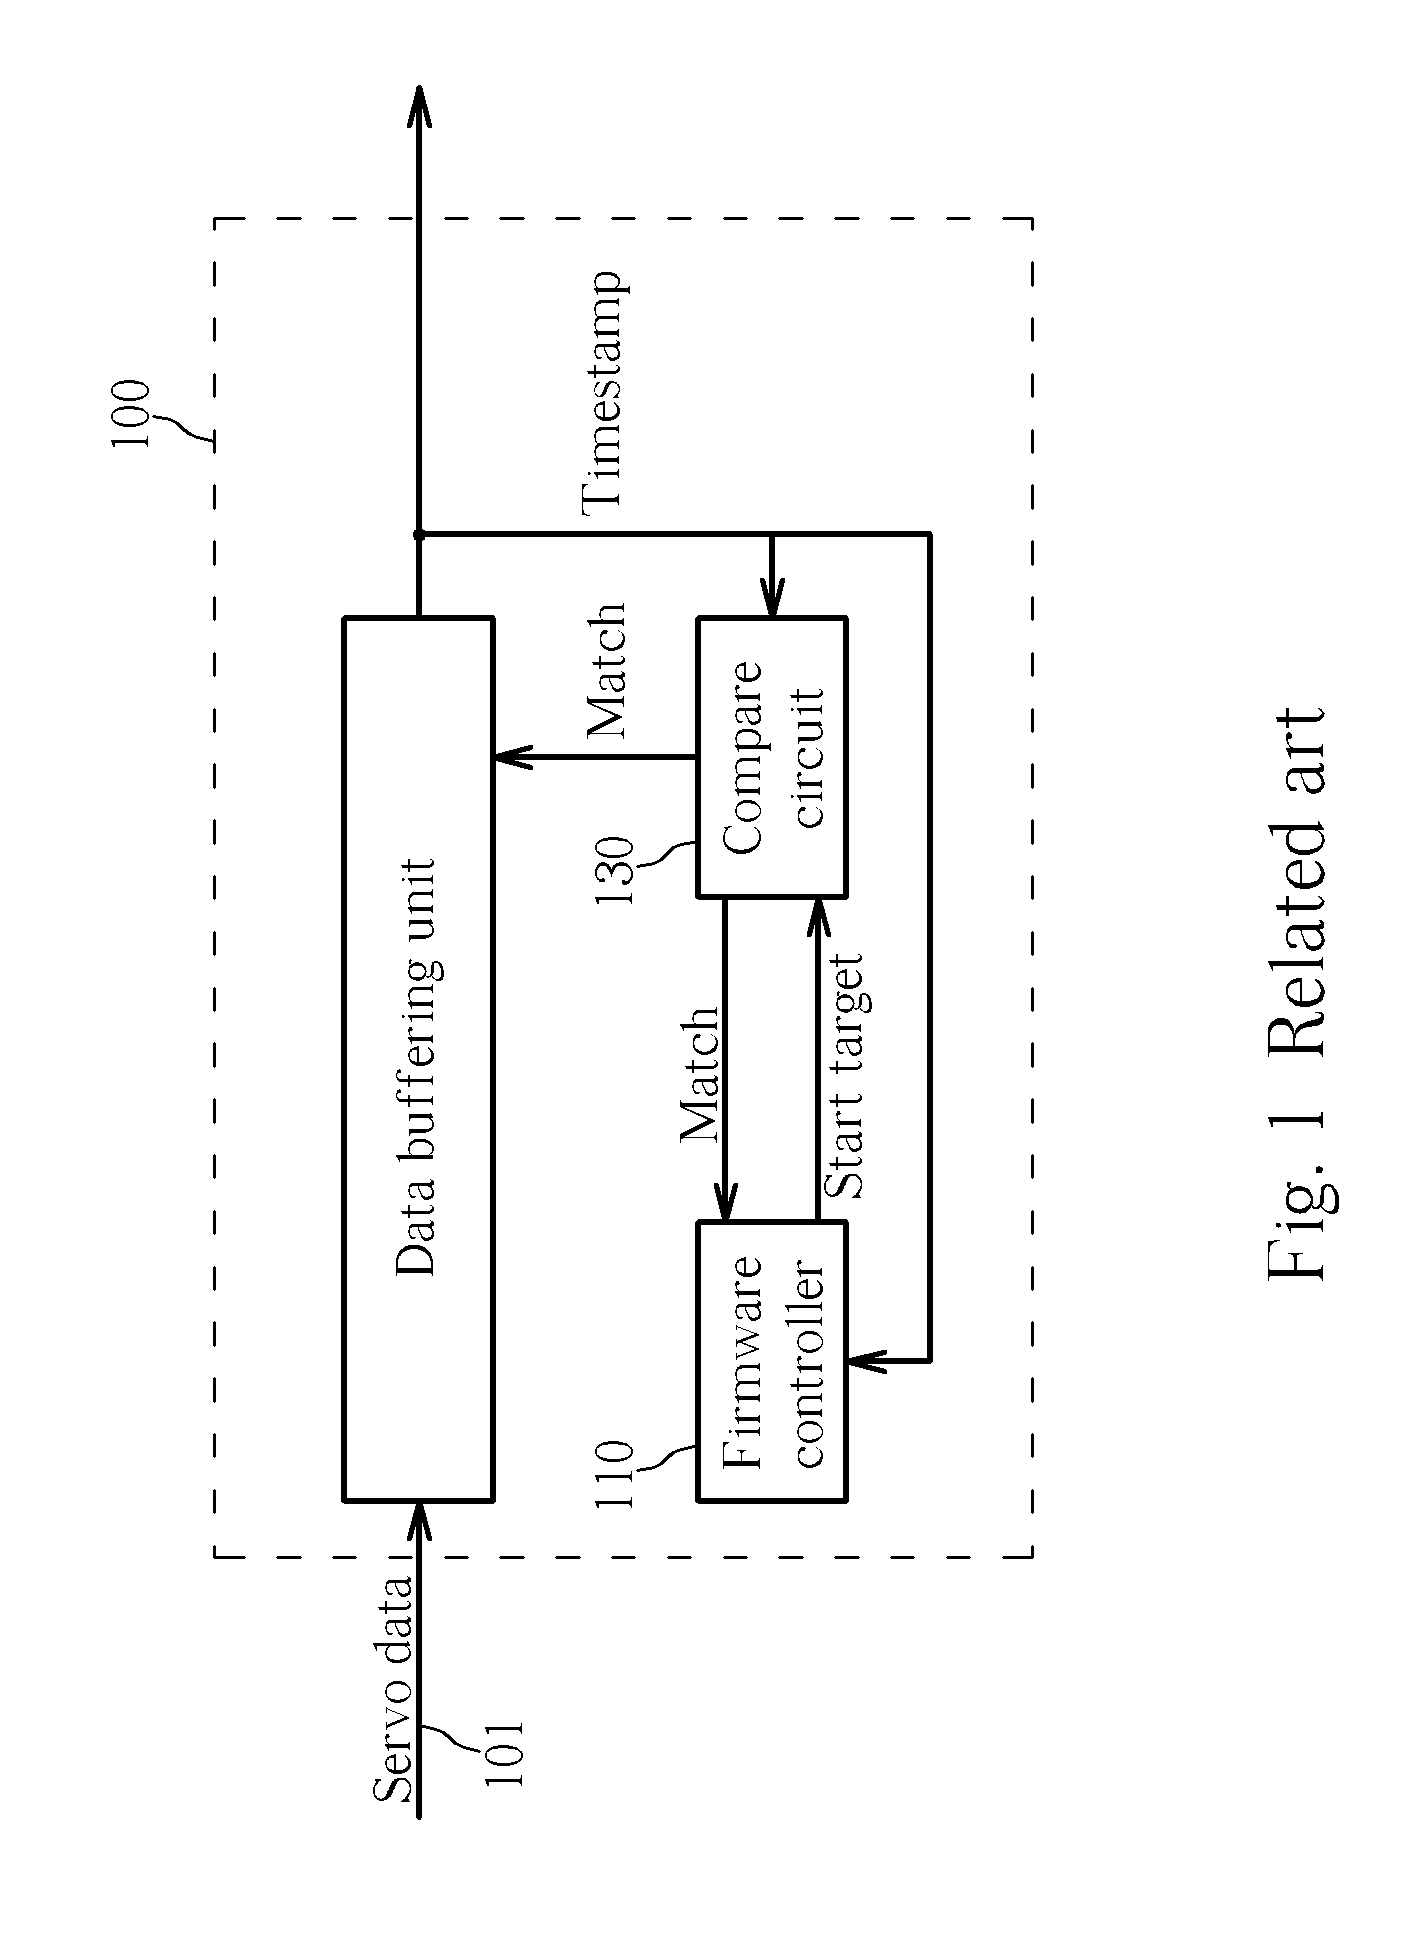 Buffer control system for reducing buffer delay time between the playback of tracks and method thereof